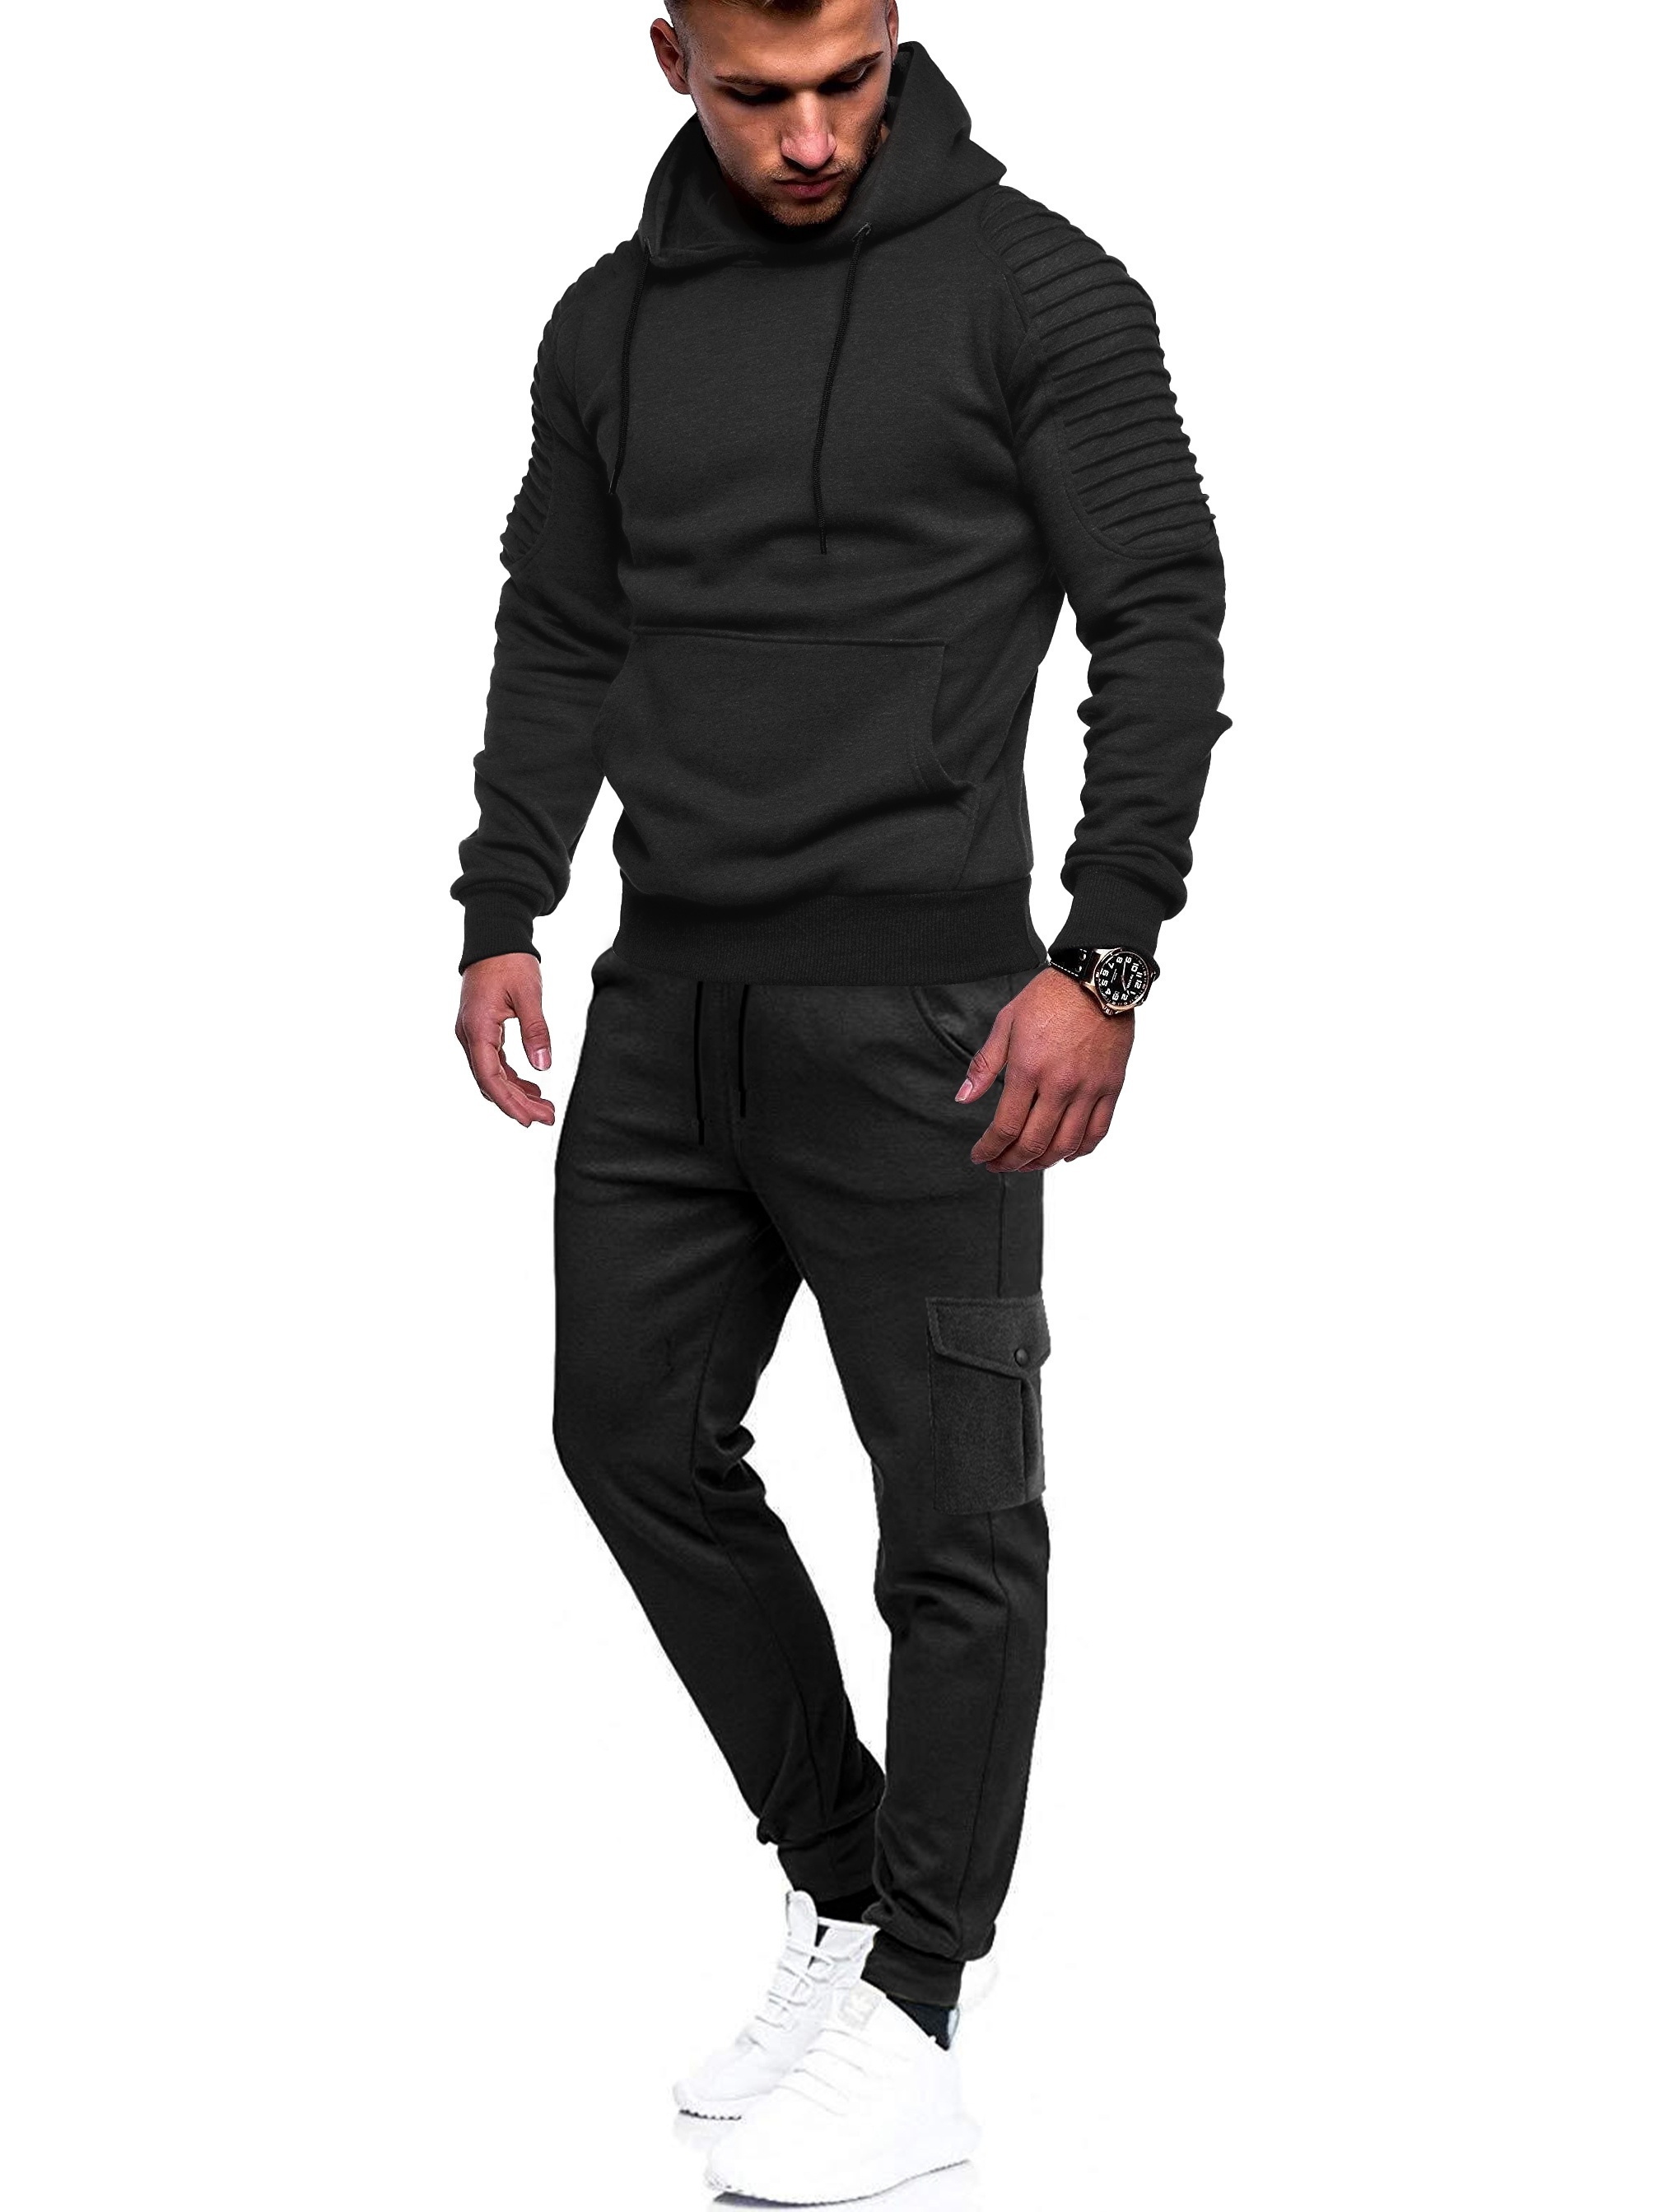 Jogging Suits For Men, Hoodie and Jogger Sets